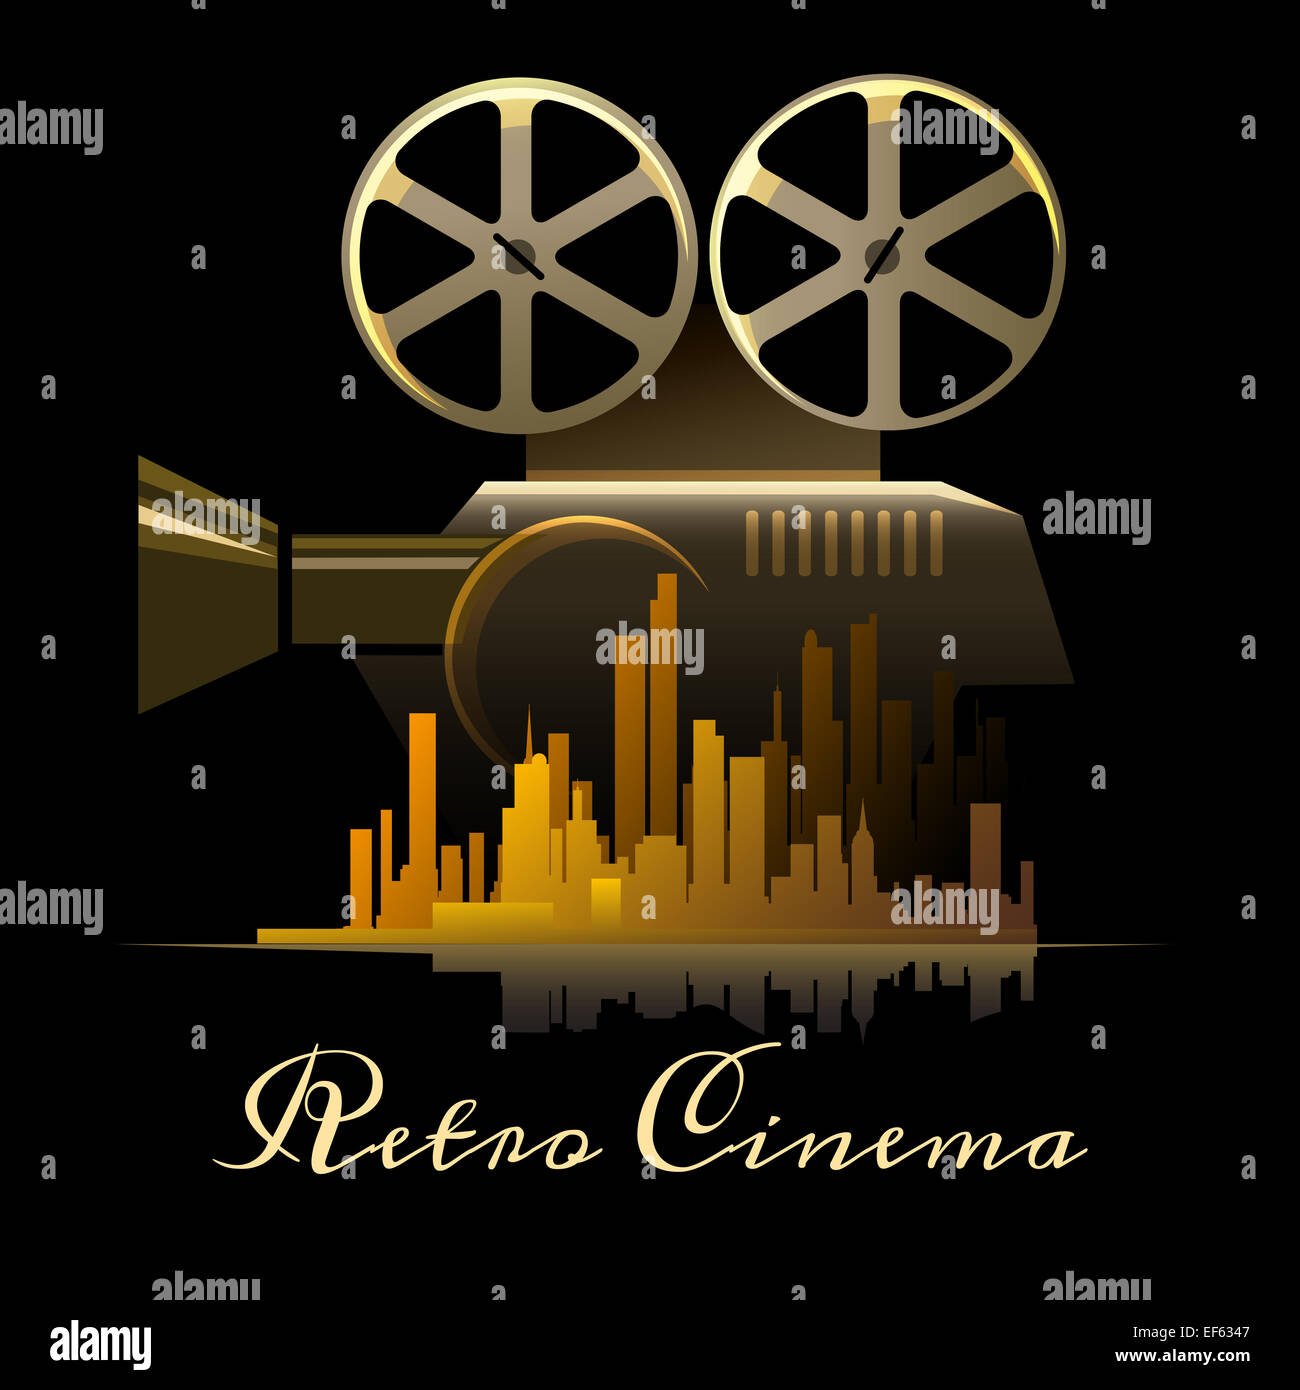 Movie camera against city silhouette drawn in classic poster style. Isolated on black background. Stock Photo